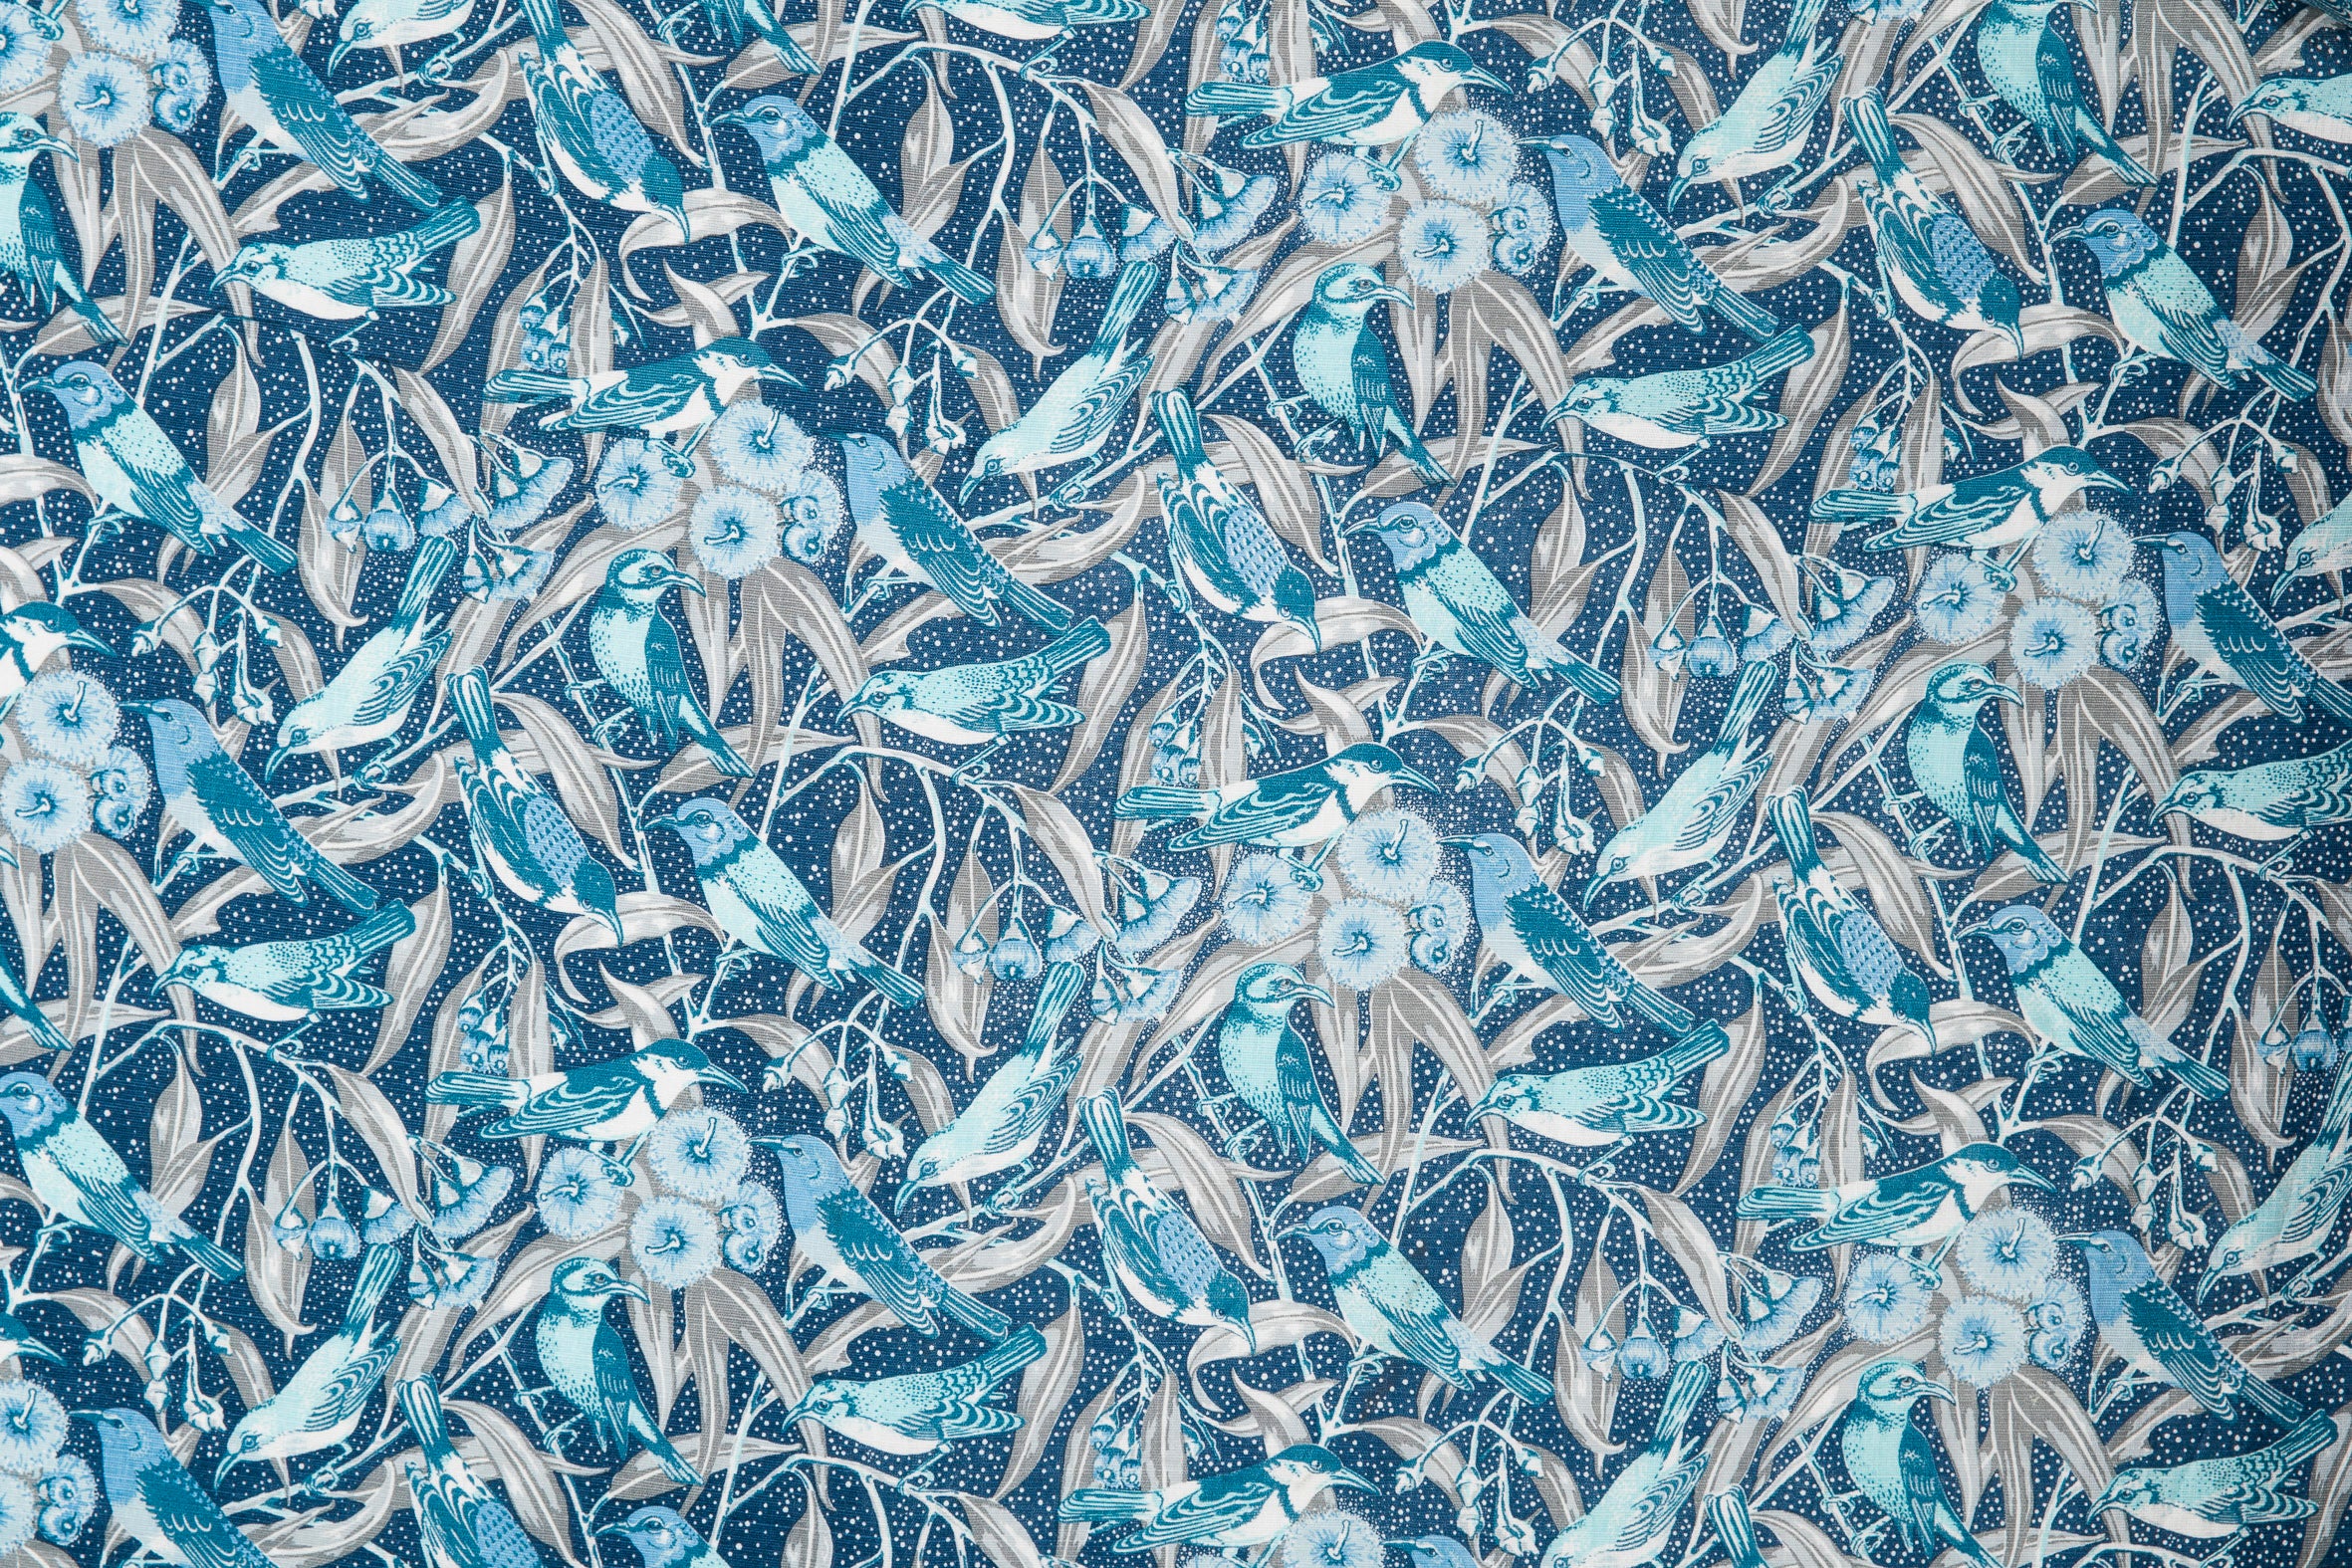 Fabric detail of a dense bird and branch pattern in shades of blue, turquoise and grey.